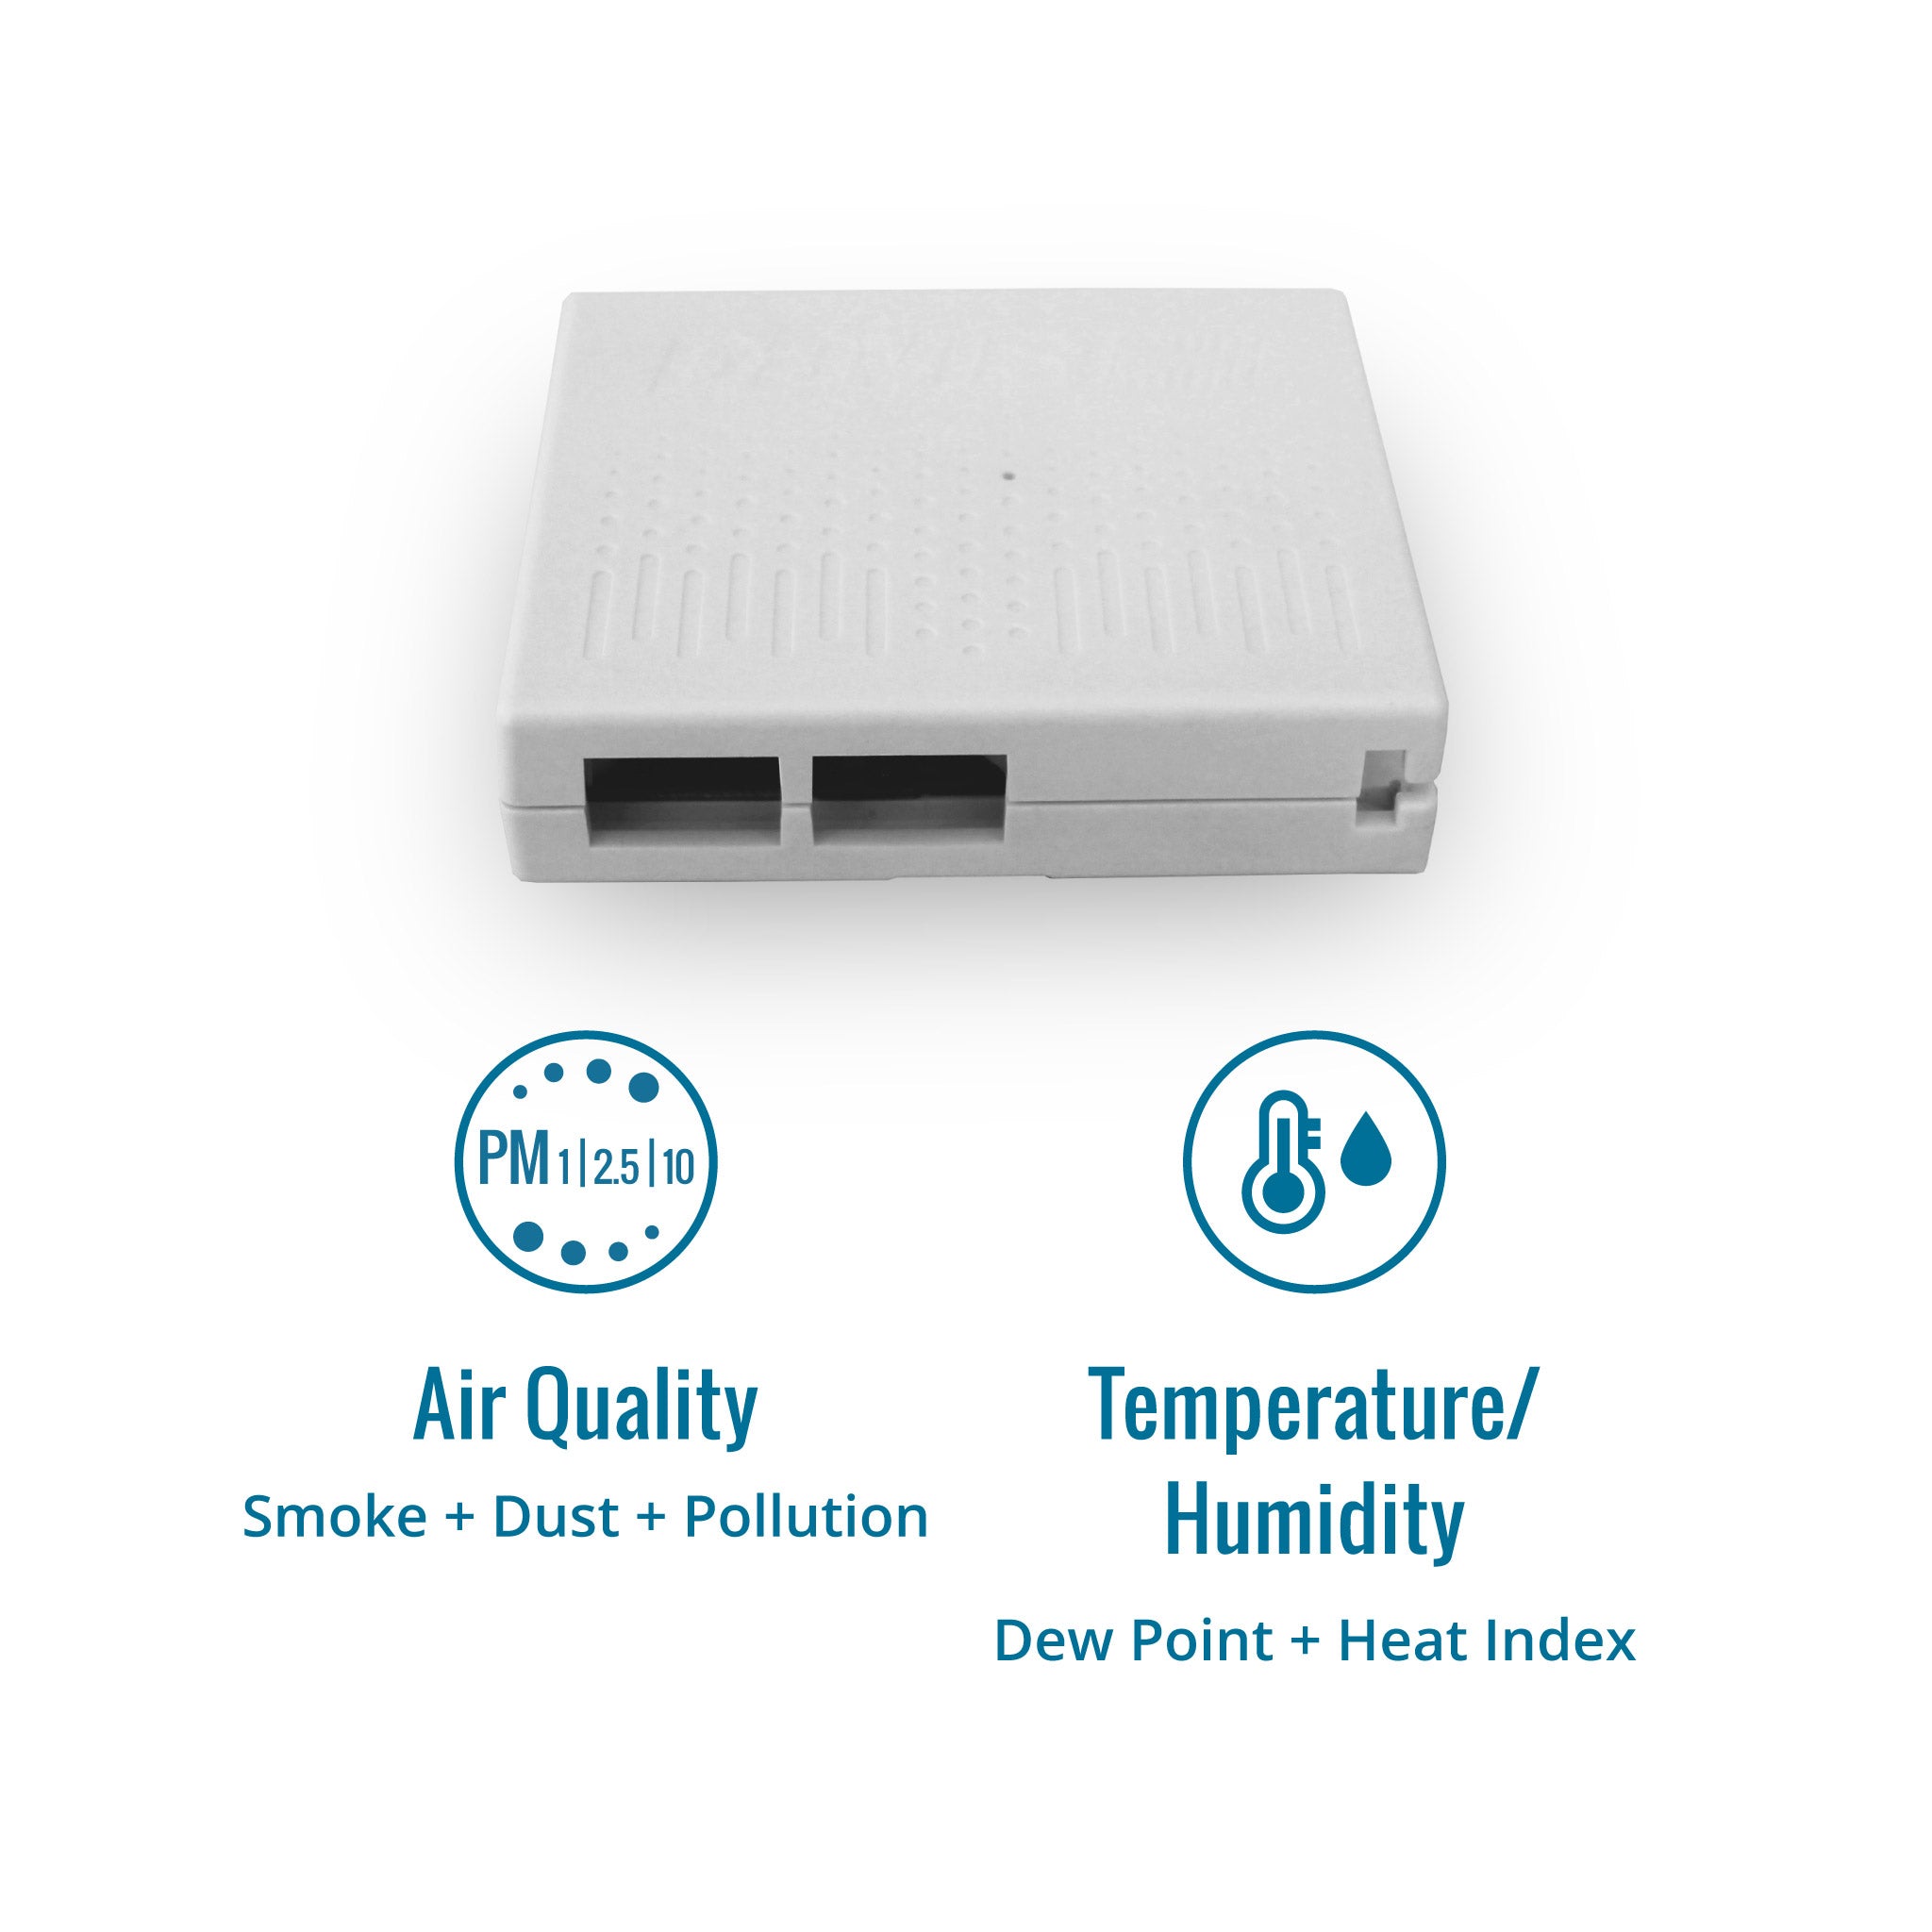 AirLink professional air quality monitor